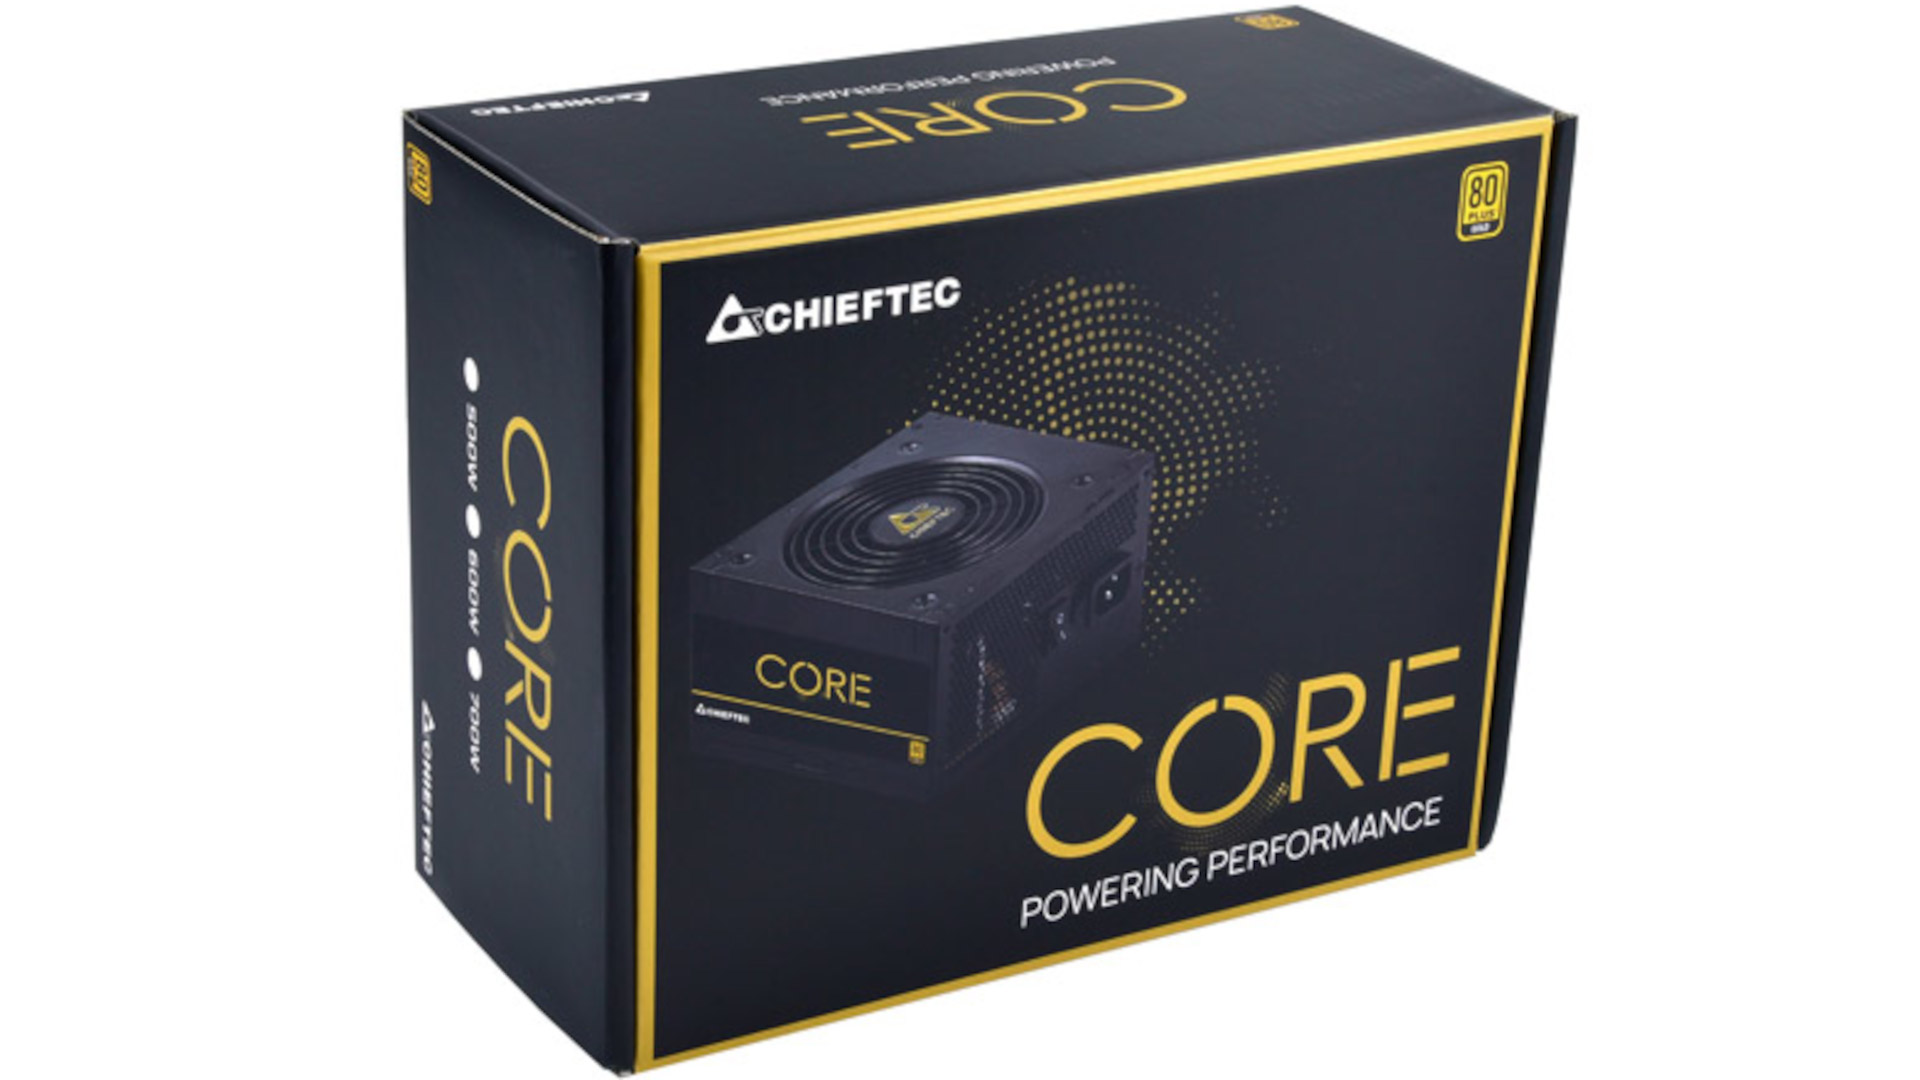 You are currently viewing CHIEFTEC CORE BBS-700S Power Supply Review